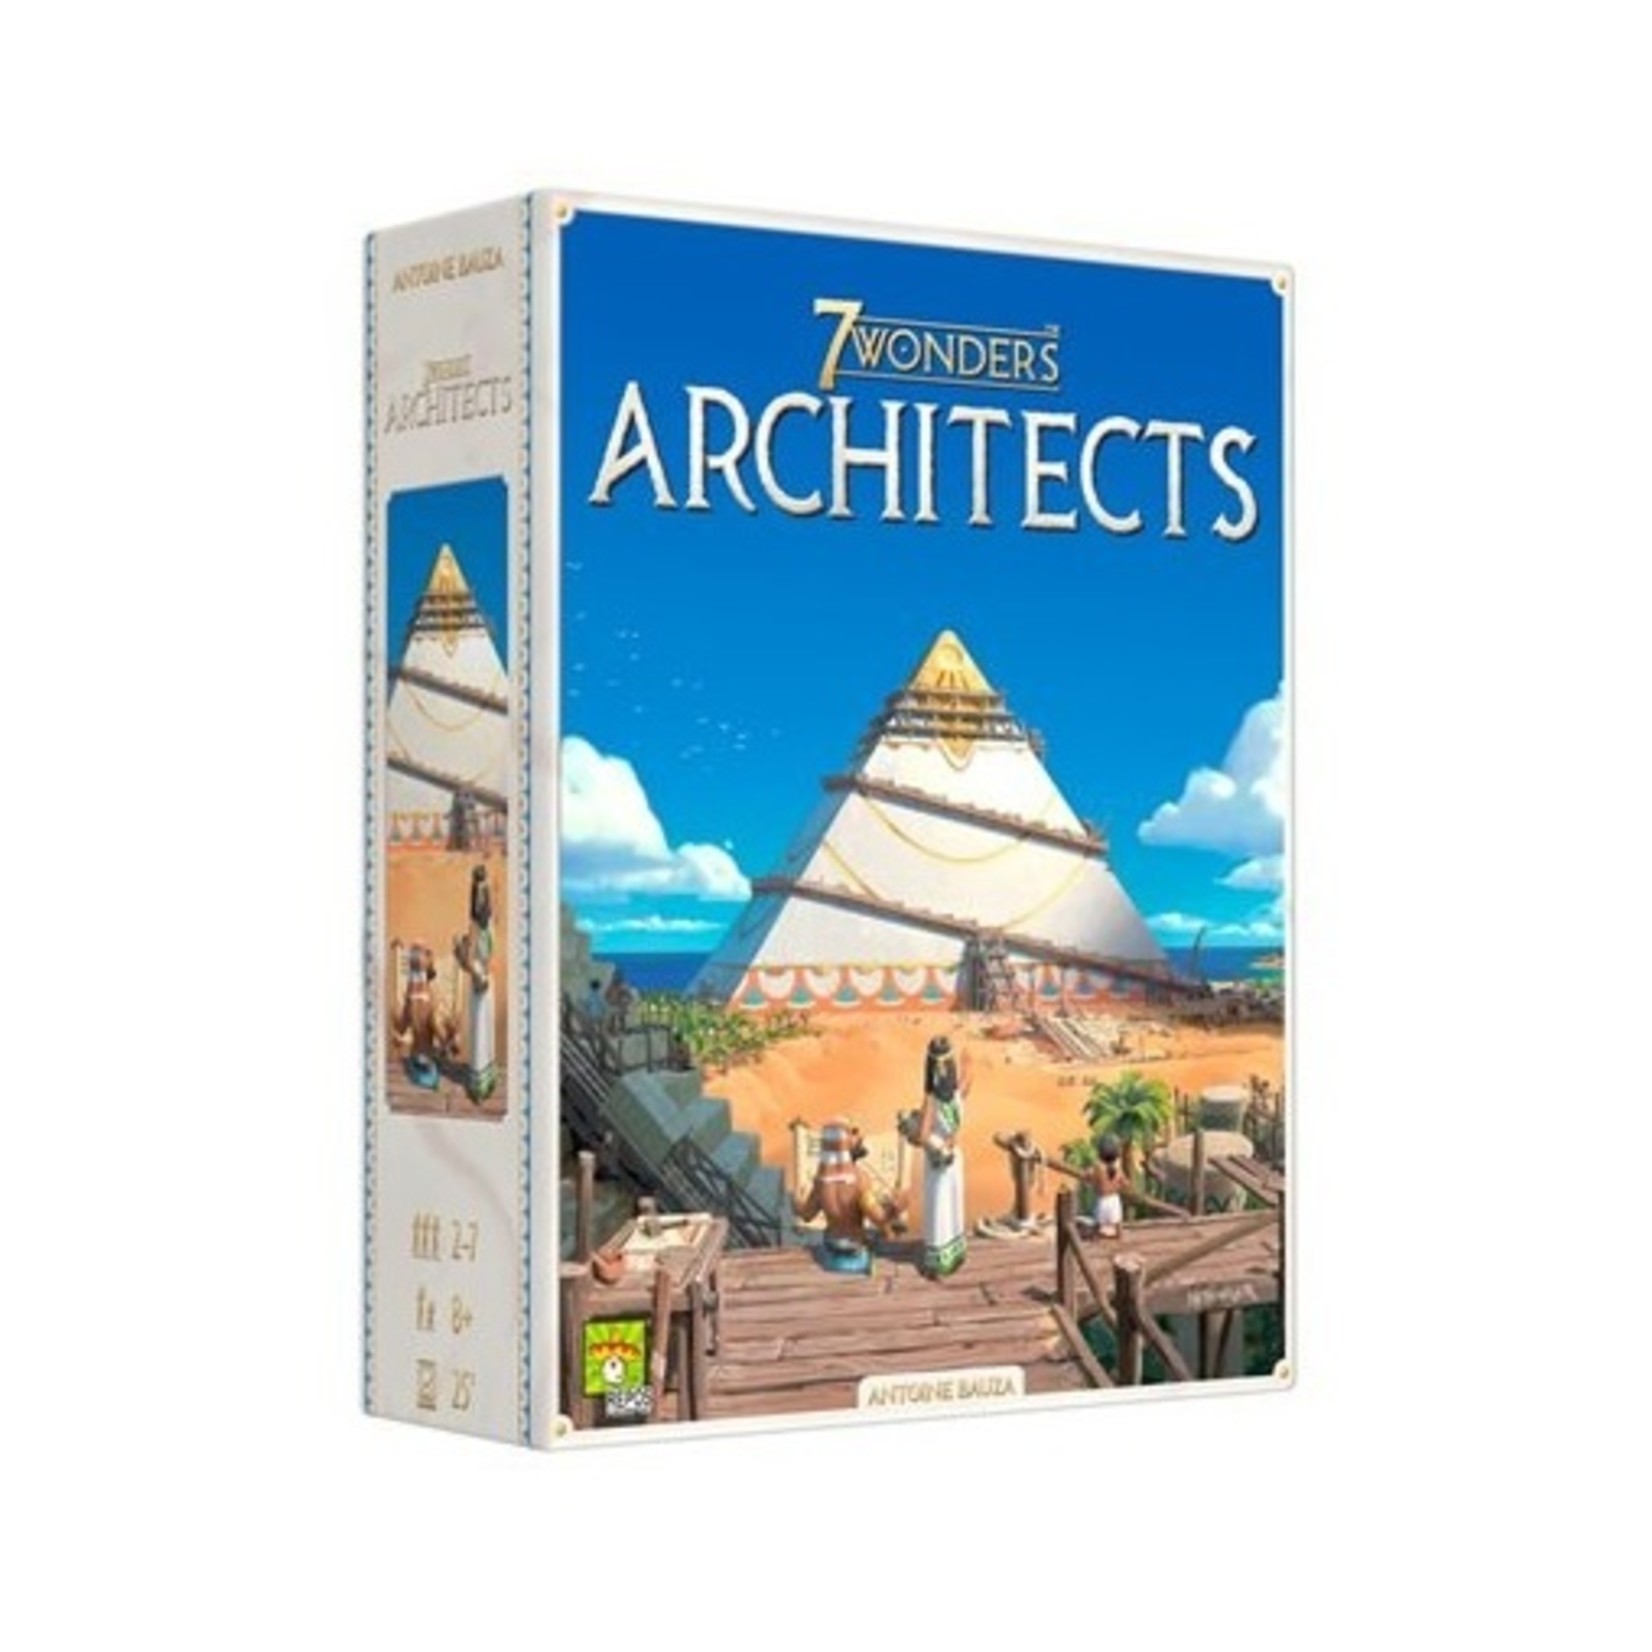 Repos Production 7 Wonders - Architects VF